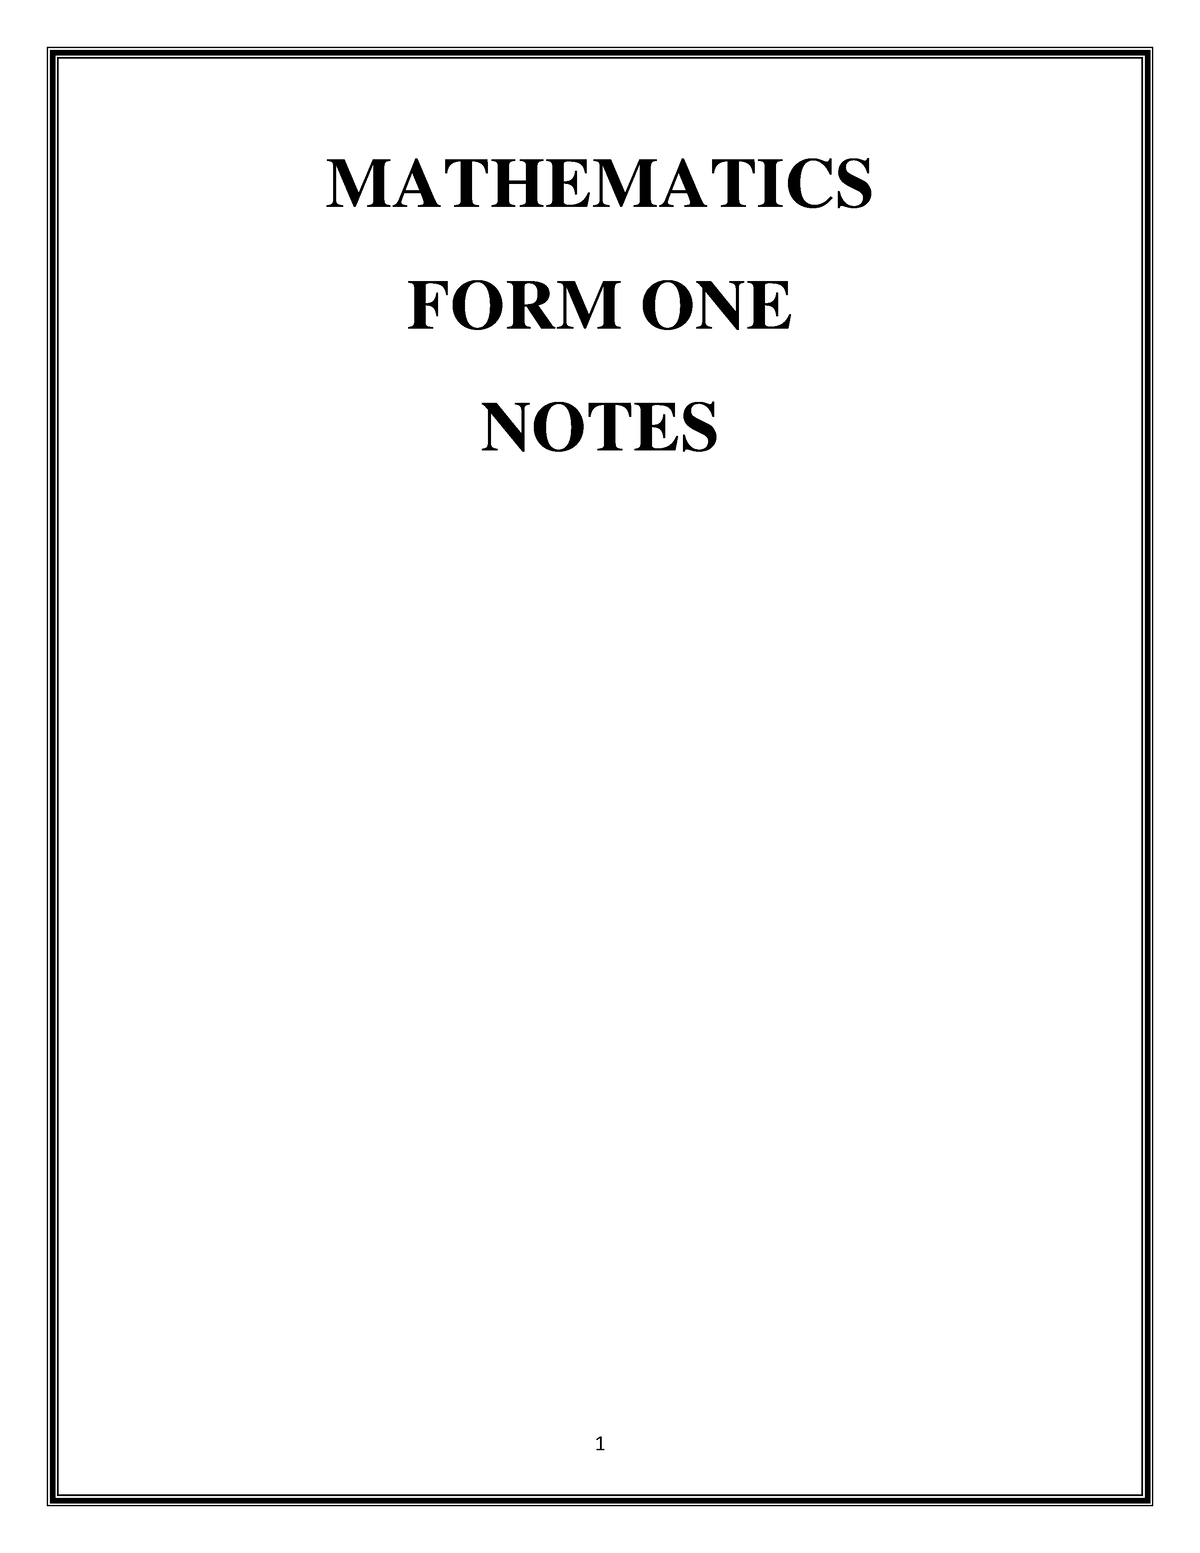 Maths FORM ONE Notes - MATHEMATICS FORM ONE NOTES NUMBERS We know that ...